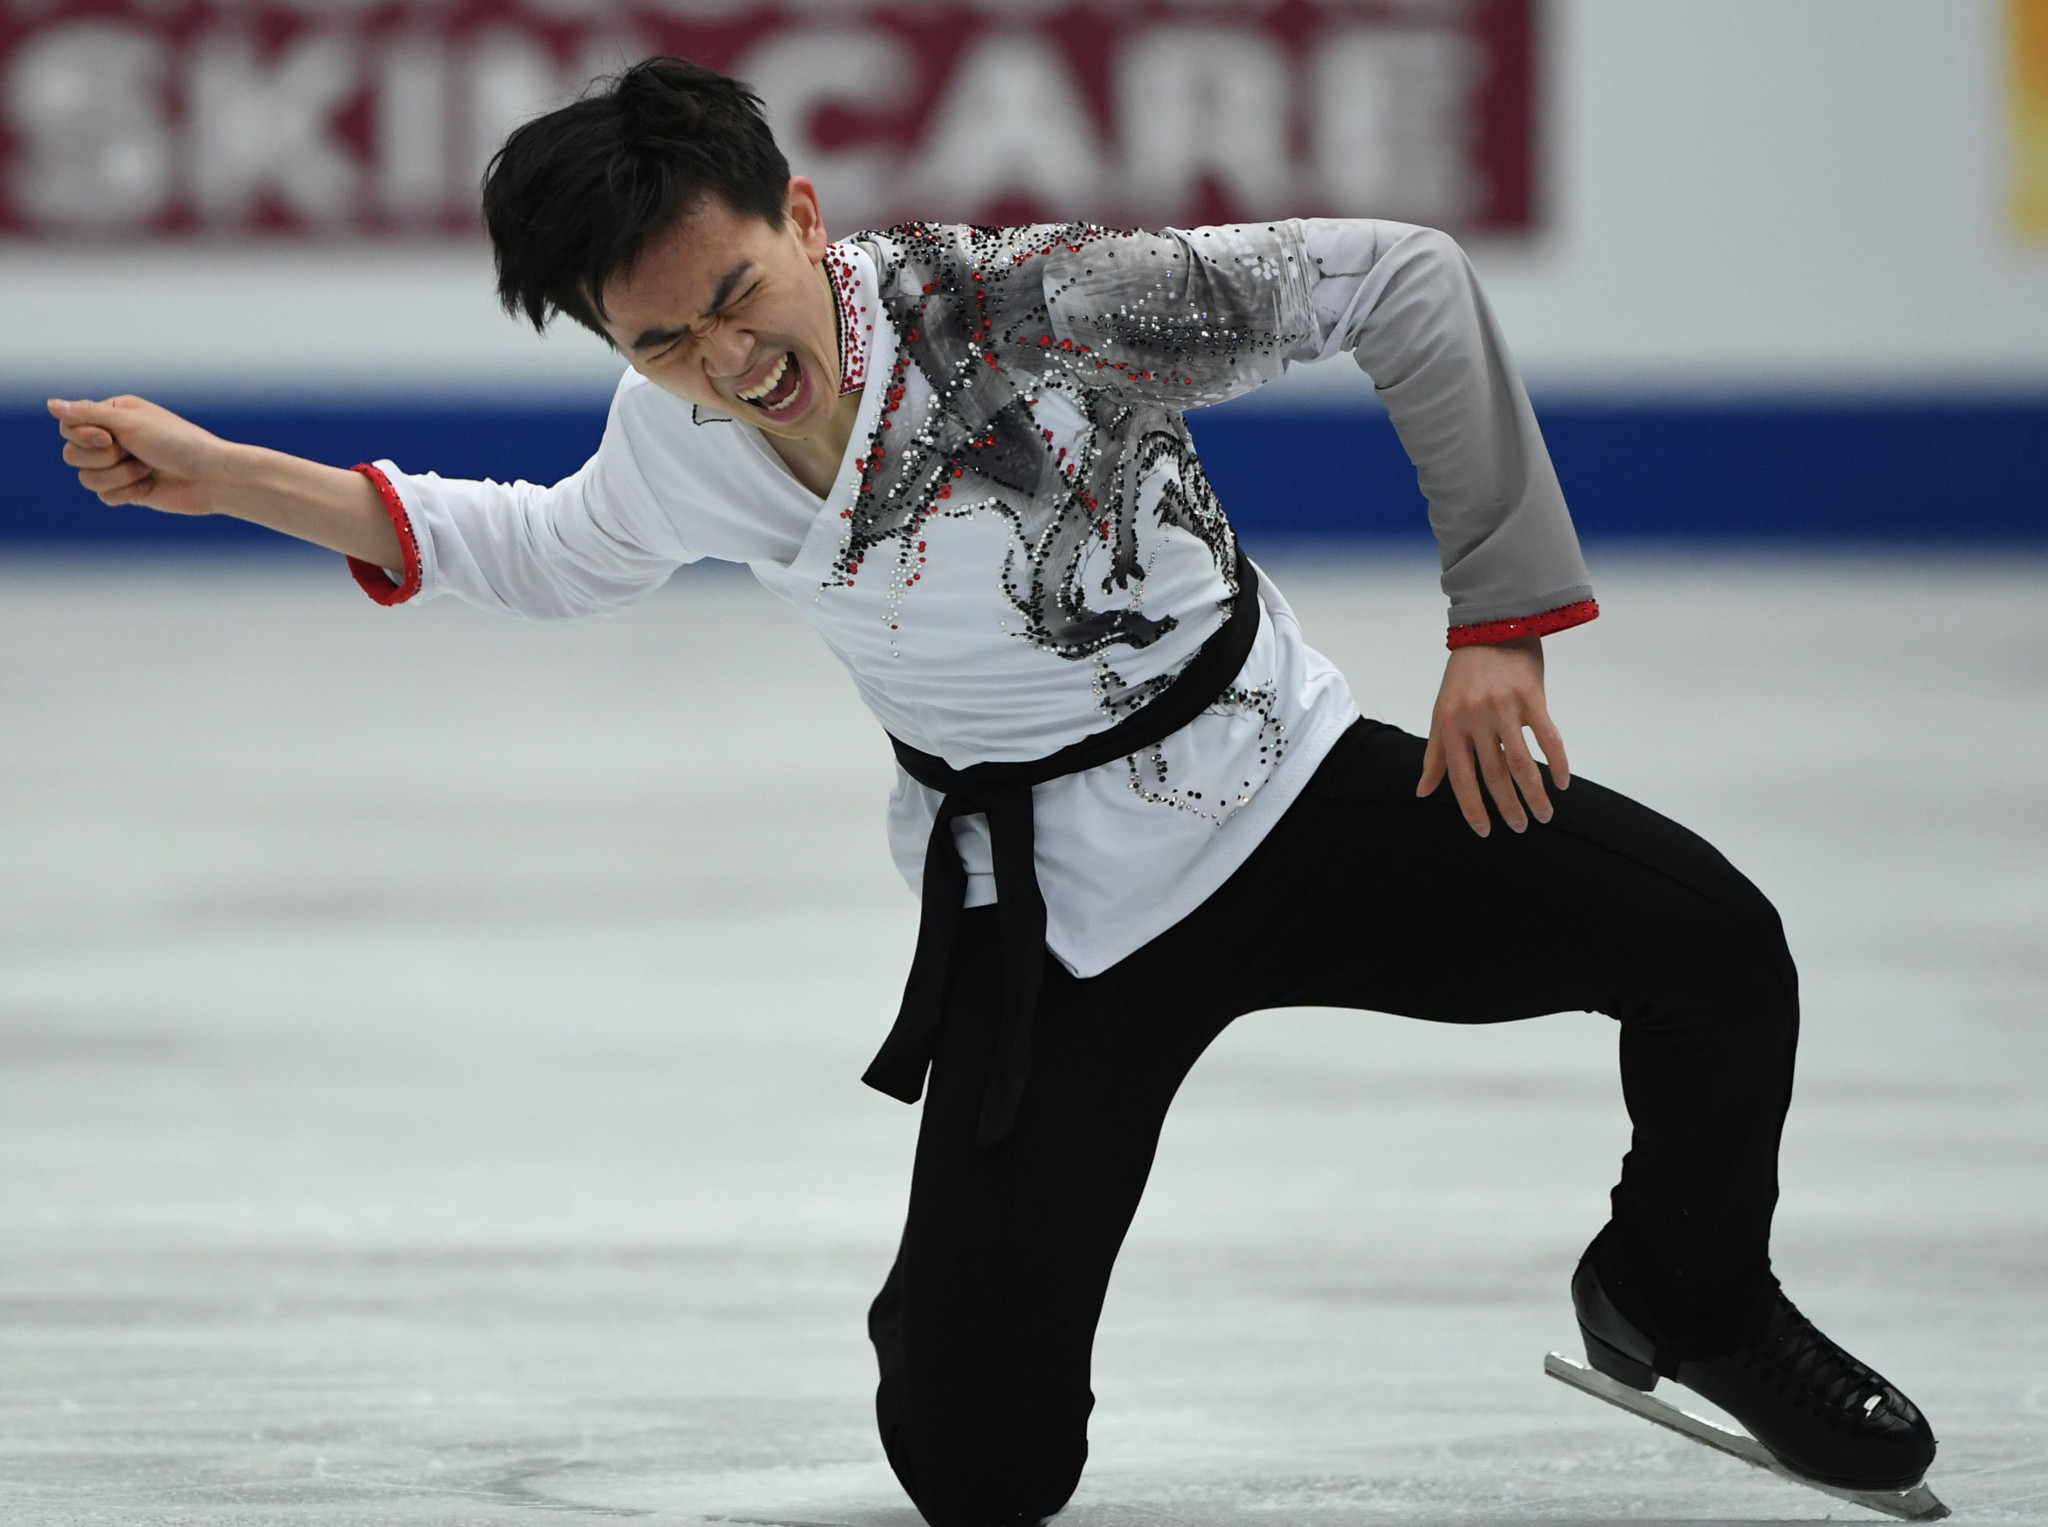 Kinoshita Group, best known for housing development and real estate ventures, has announced it has agreed to sponsor American figure skater Vincent Zhou ©Getty Images